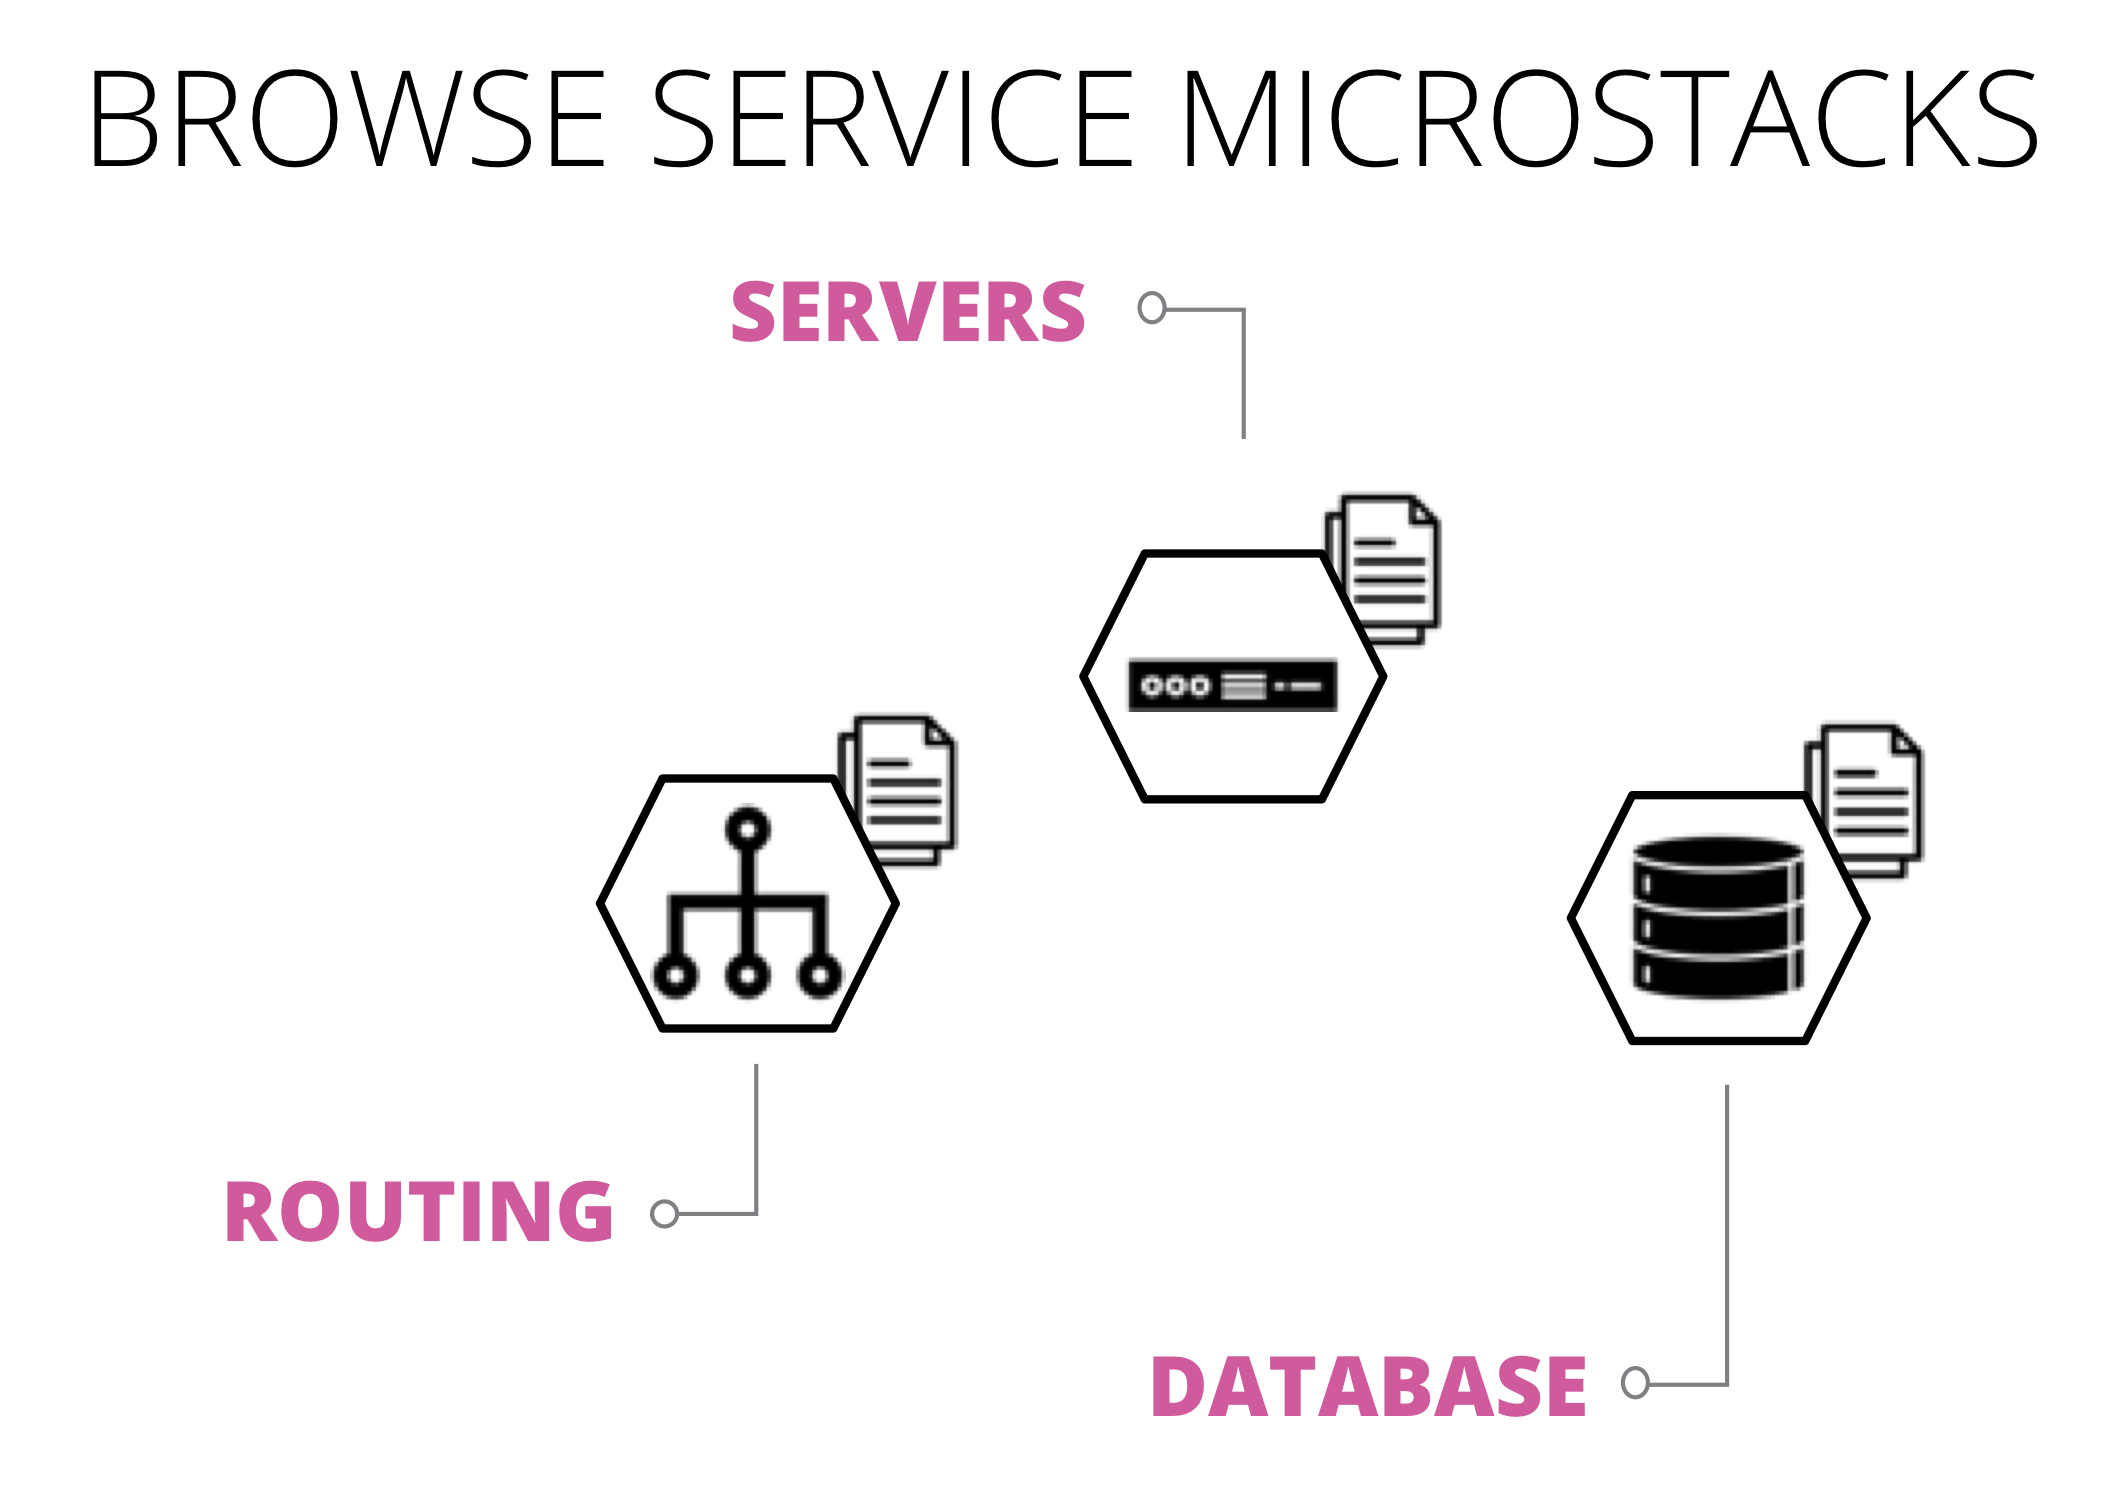 Micro stacks divide the infrastructure for a single service across multiple stacks